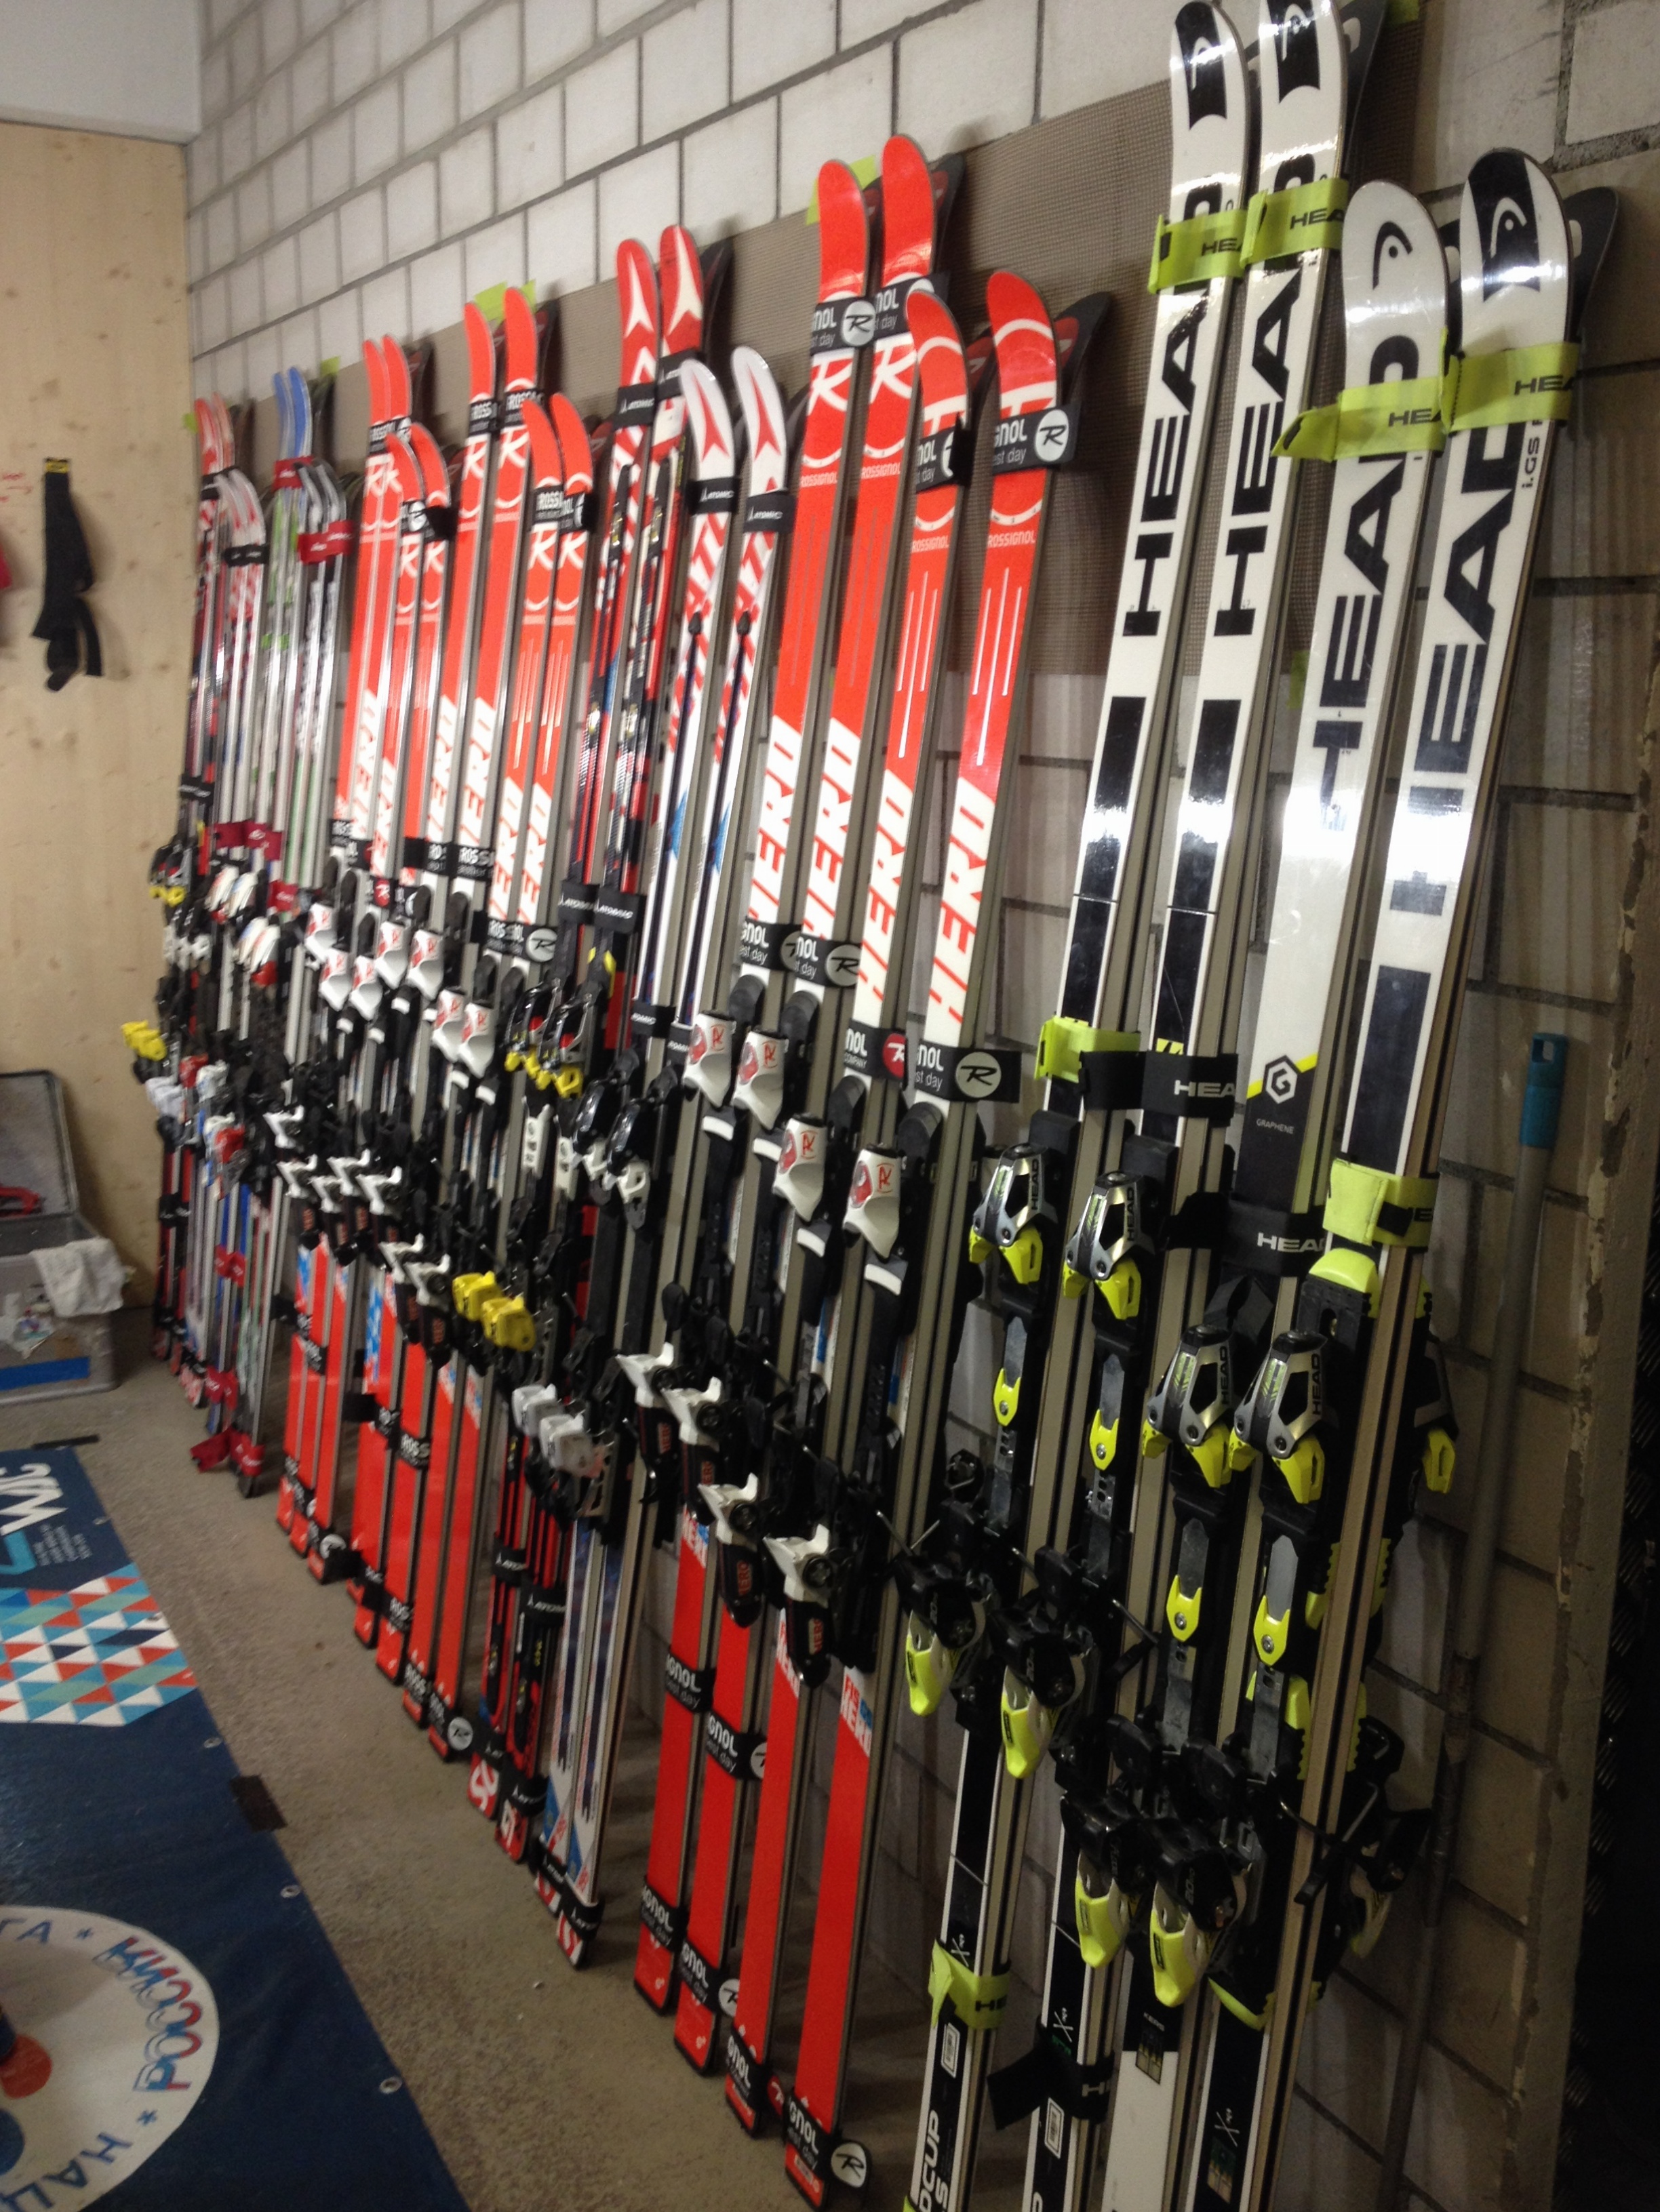 View of all the Super G and Giant Slalom skis used by the team. 